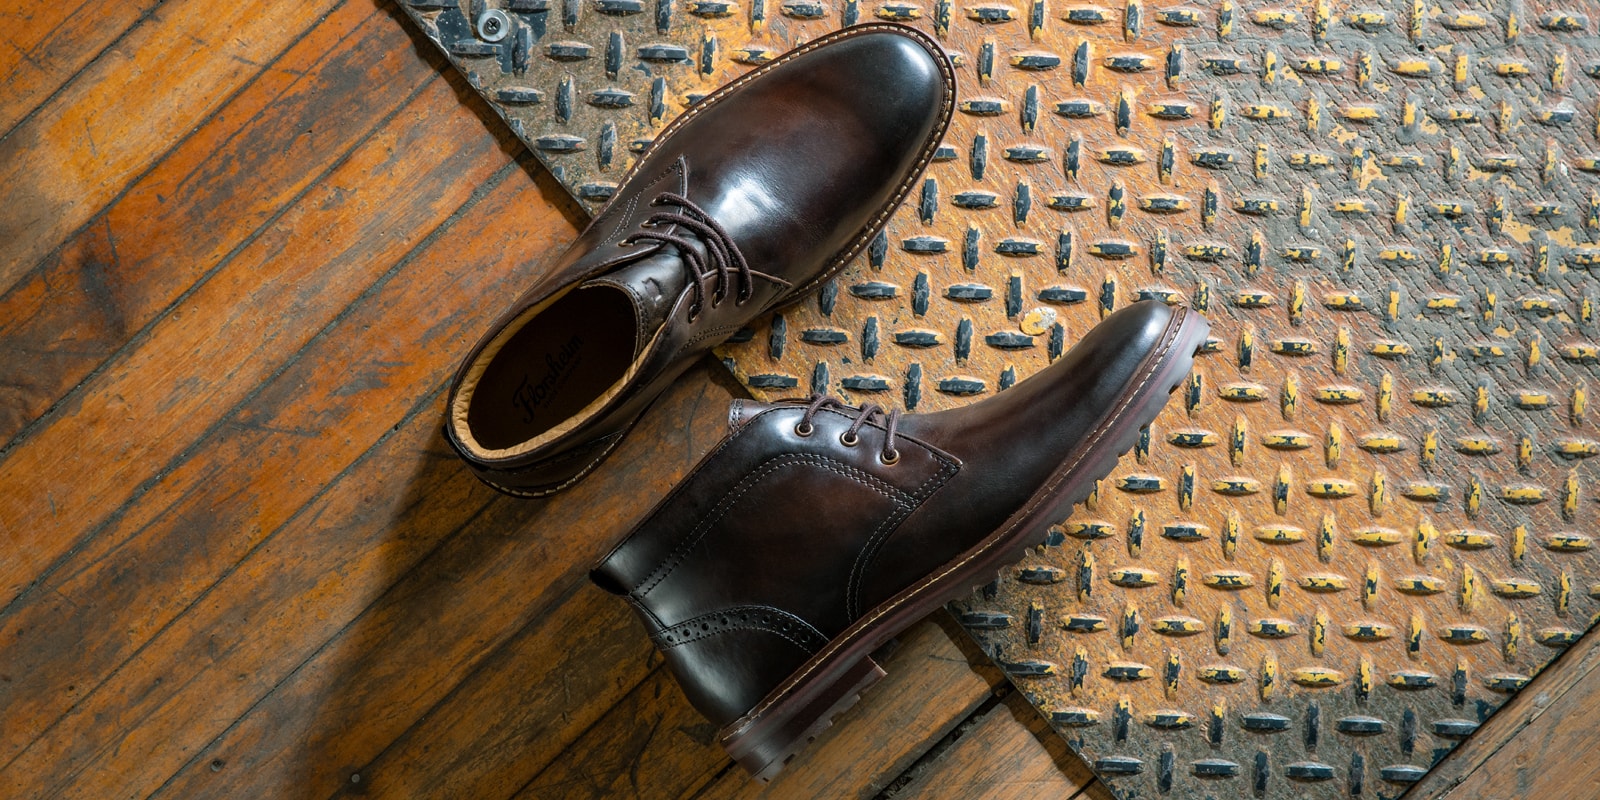 The featured image is the Estabrook Plain Toe Chukka Boot in Brown Crazy Horse.